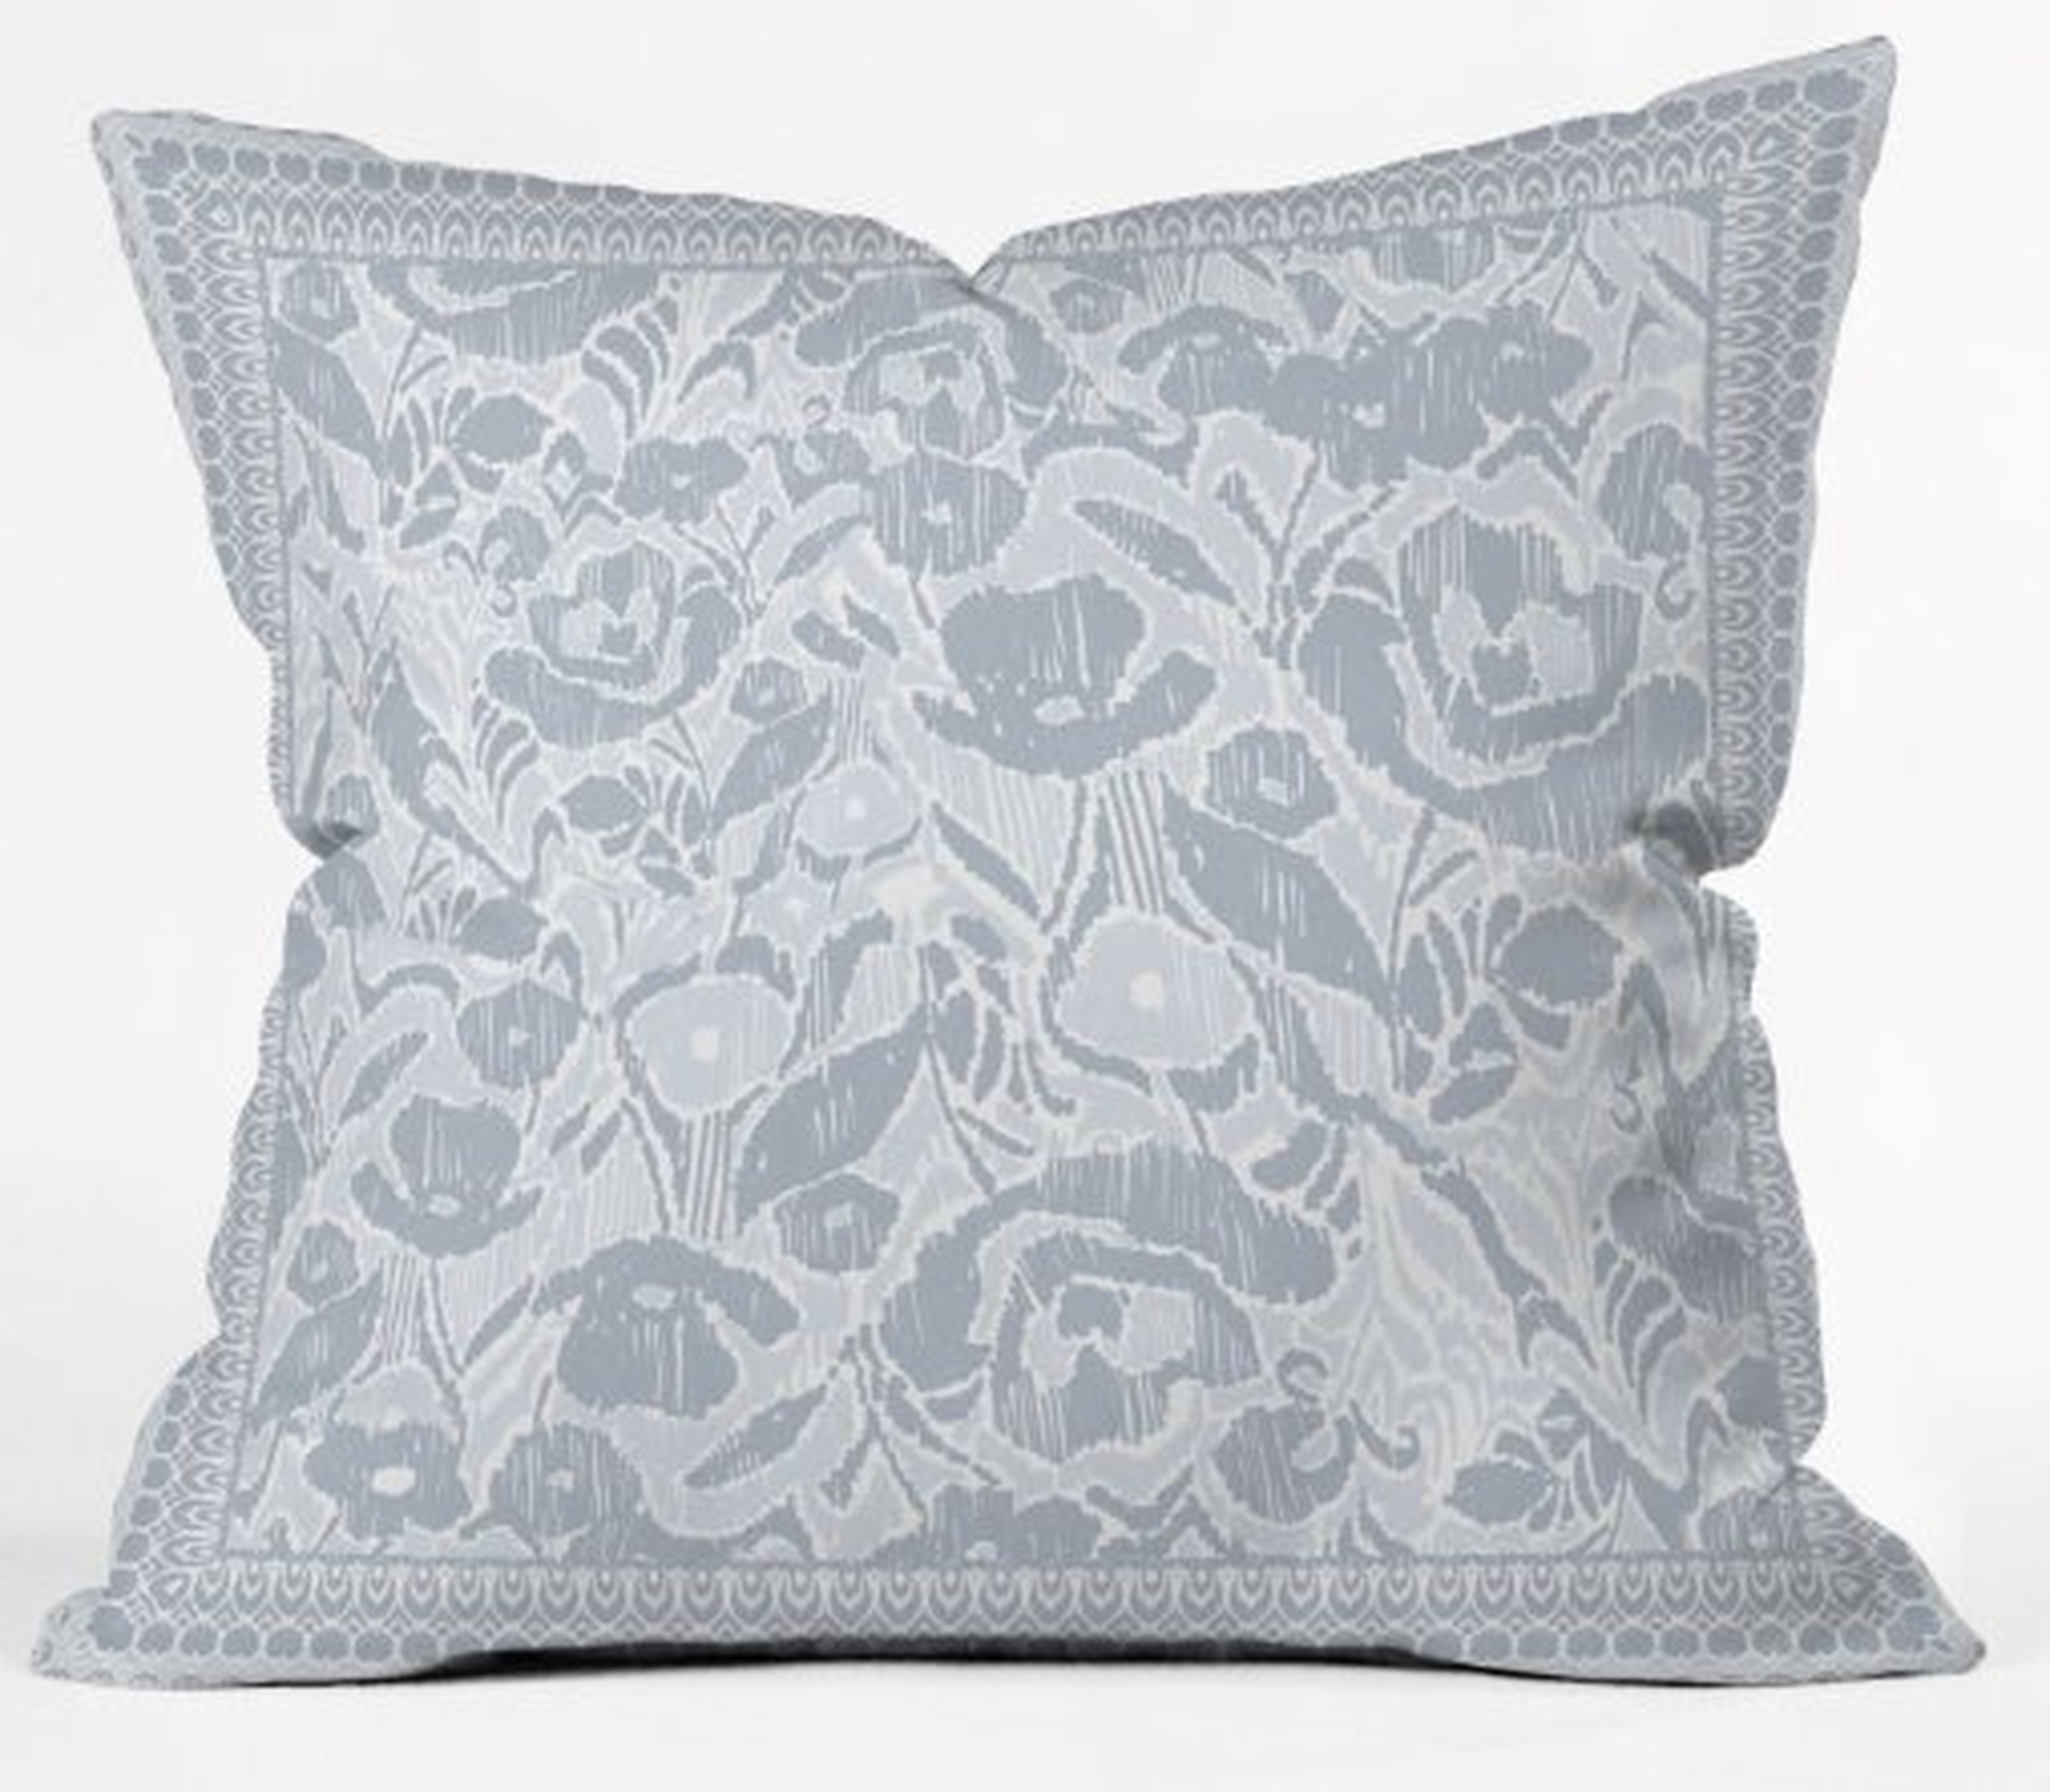 Nordic Way Pillow, 18" with insert - Wander Print Co.